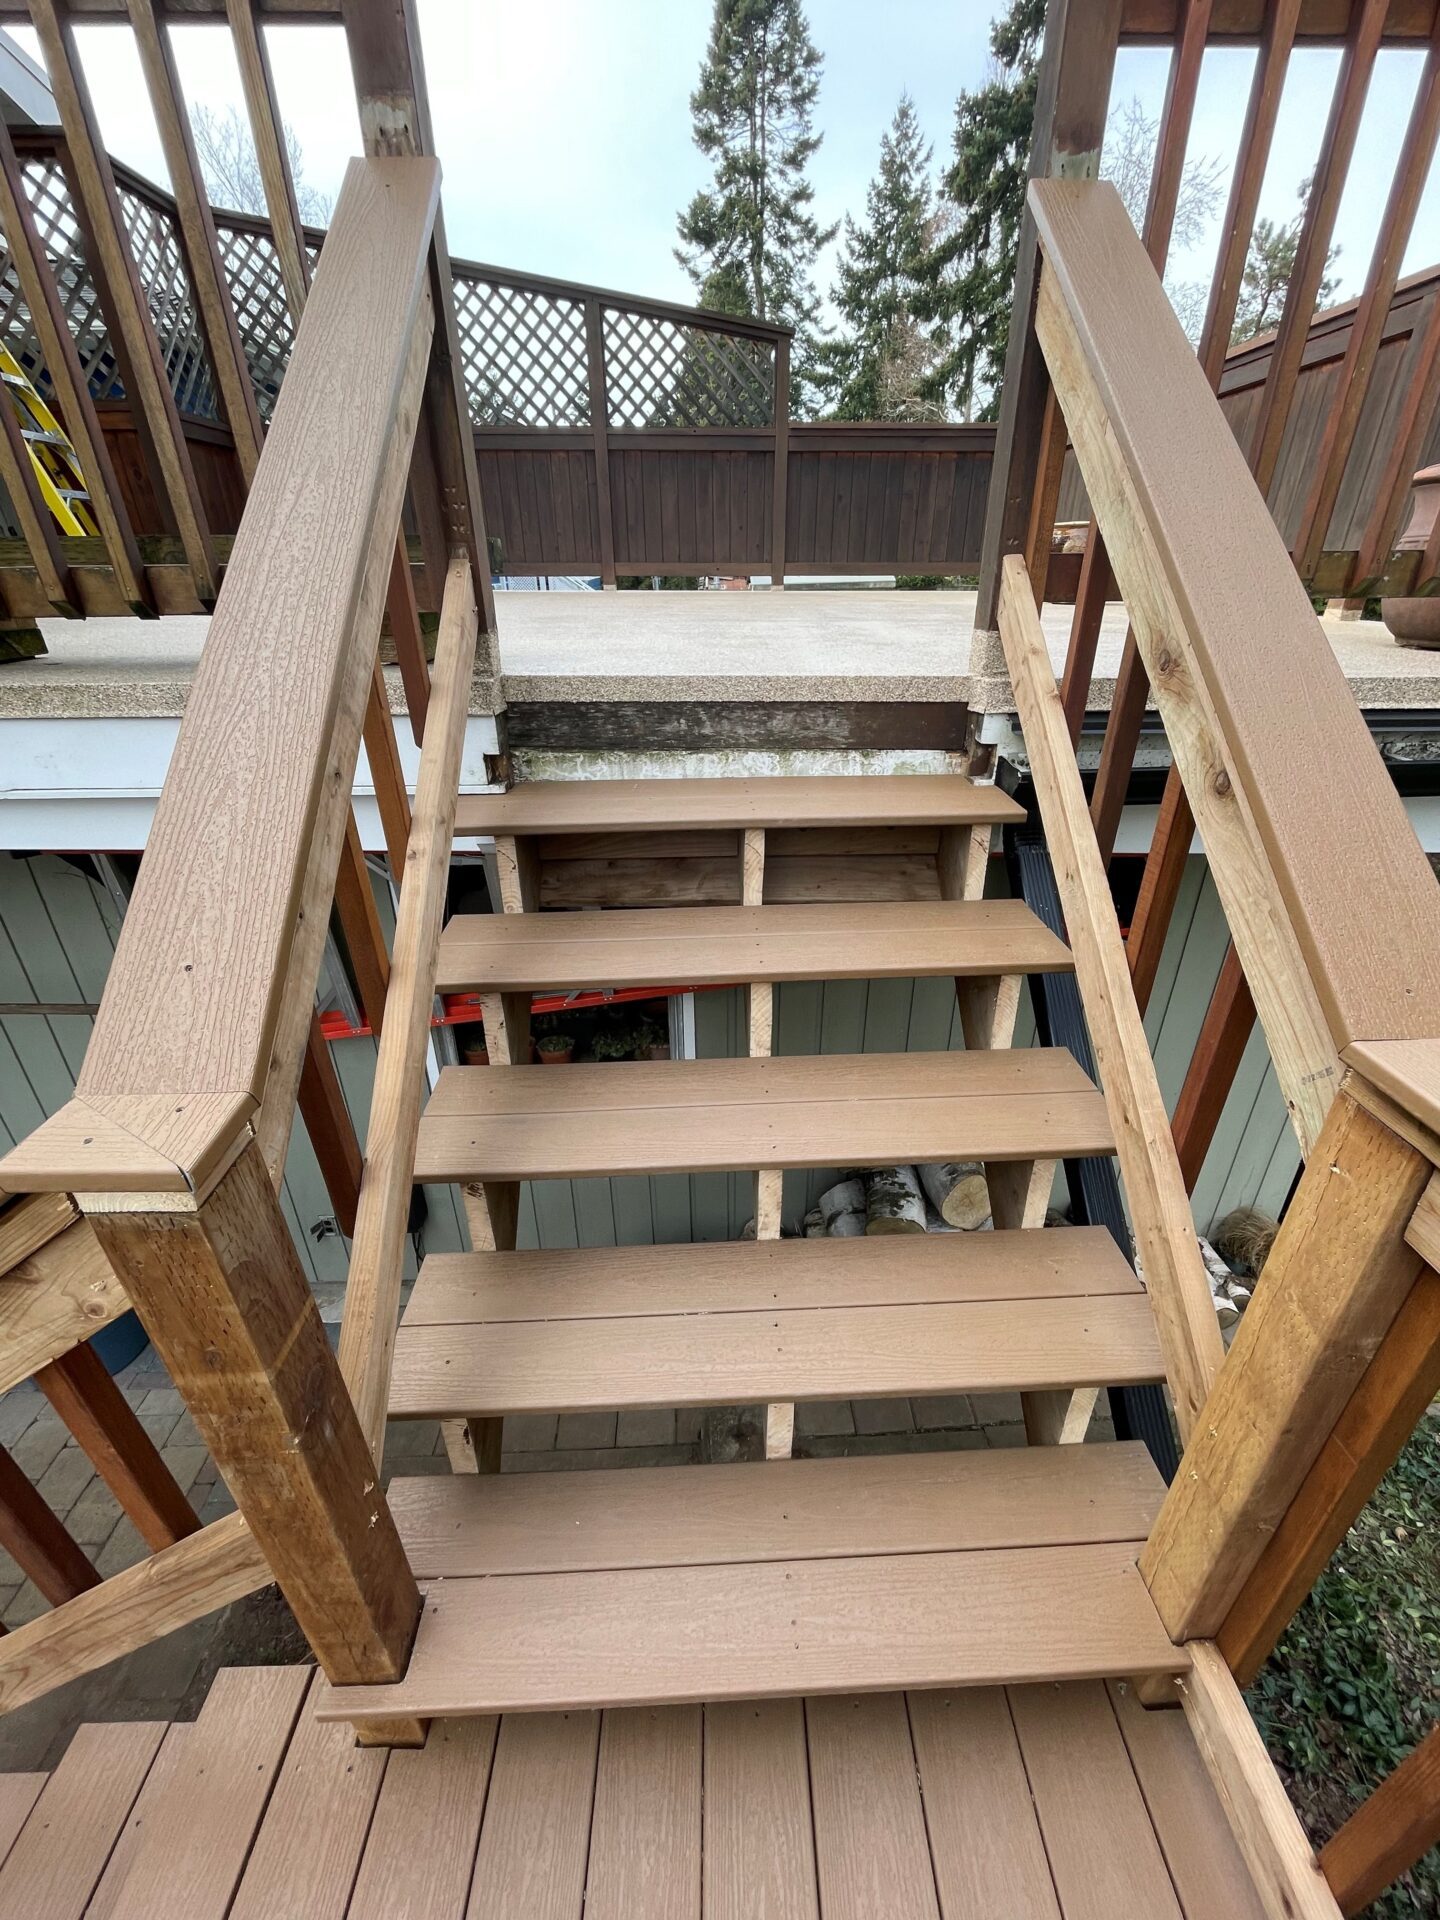 After renovation of wooden stairs